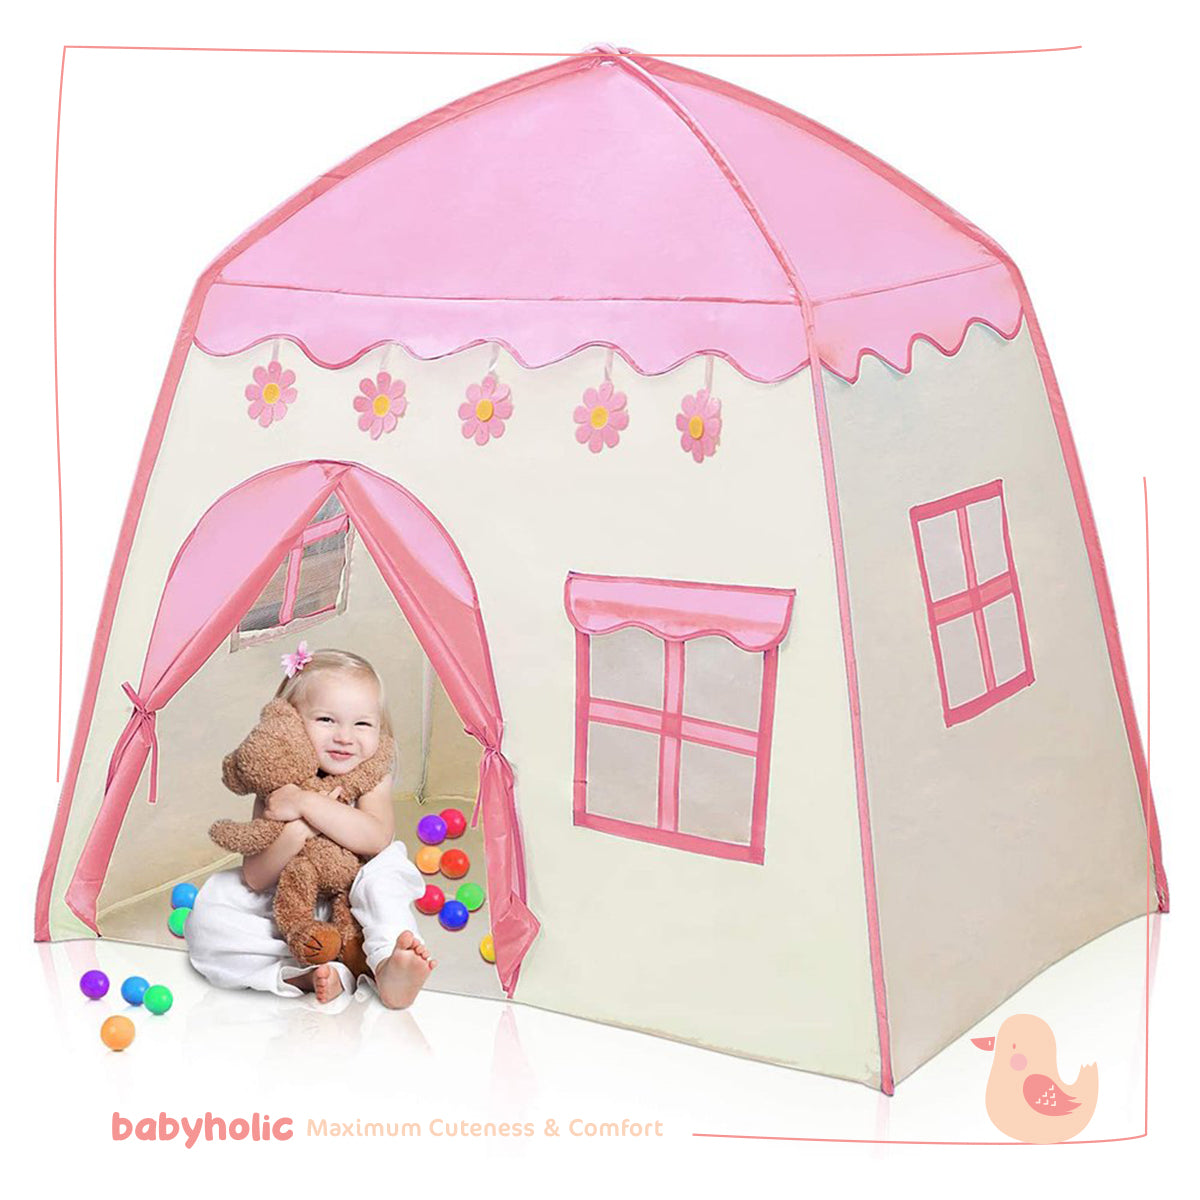 Baby Play Tent